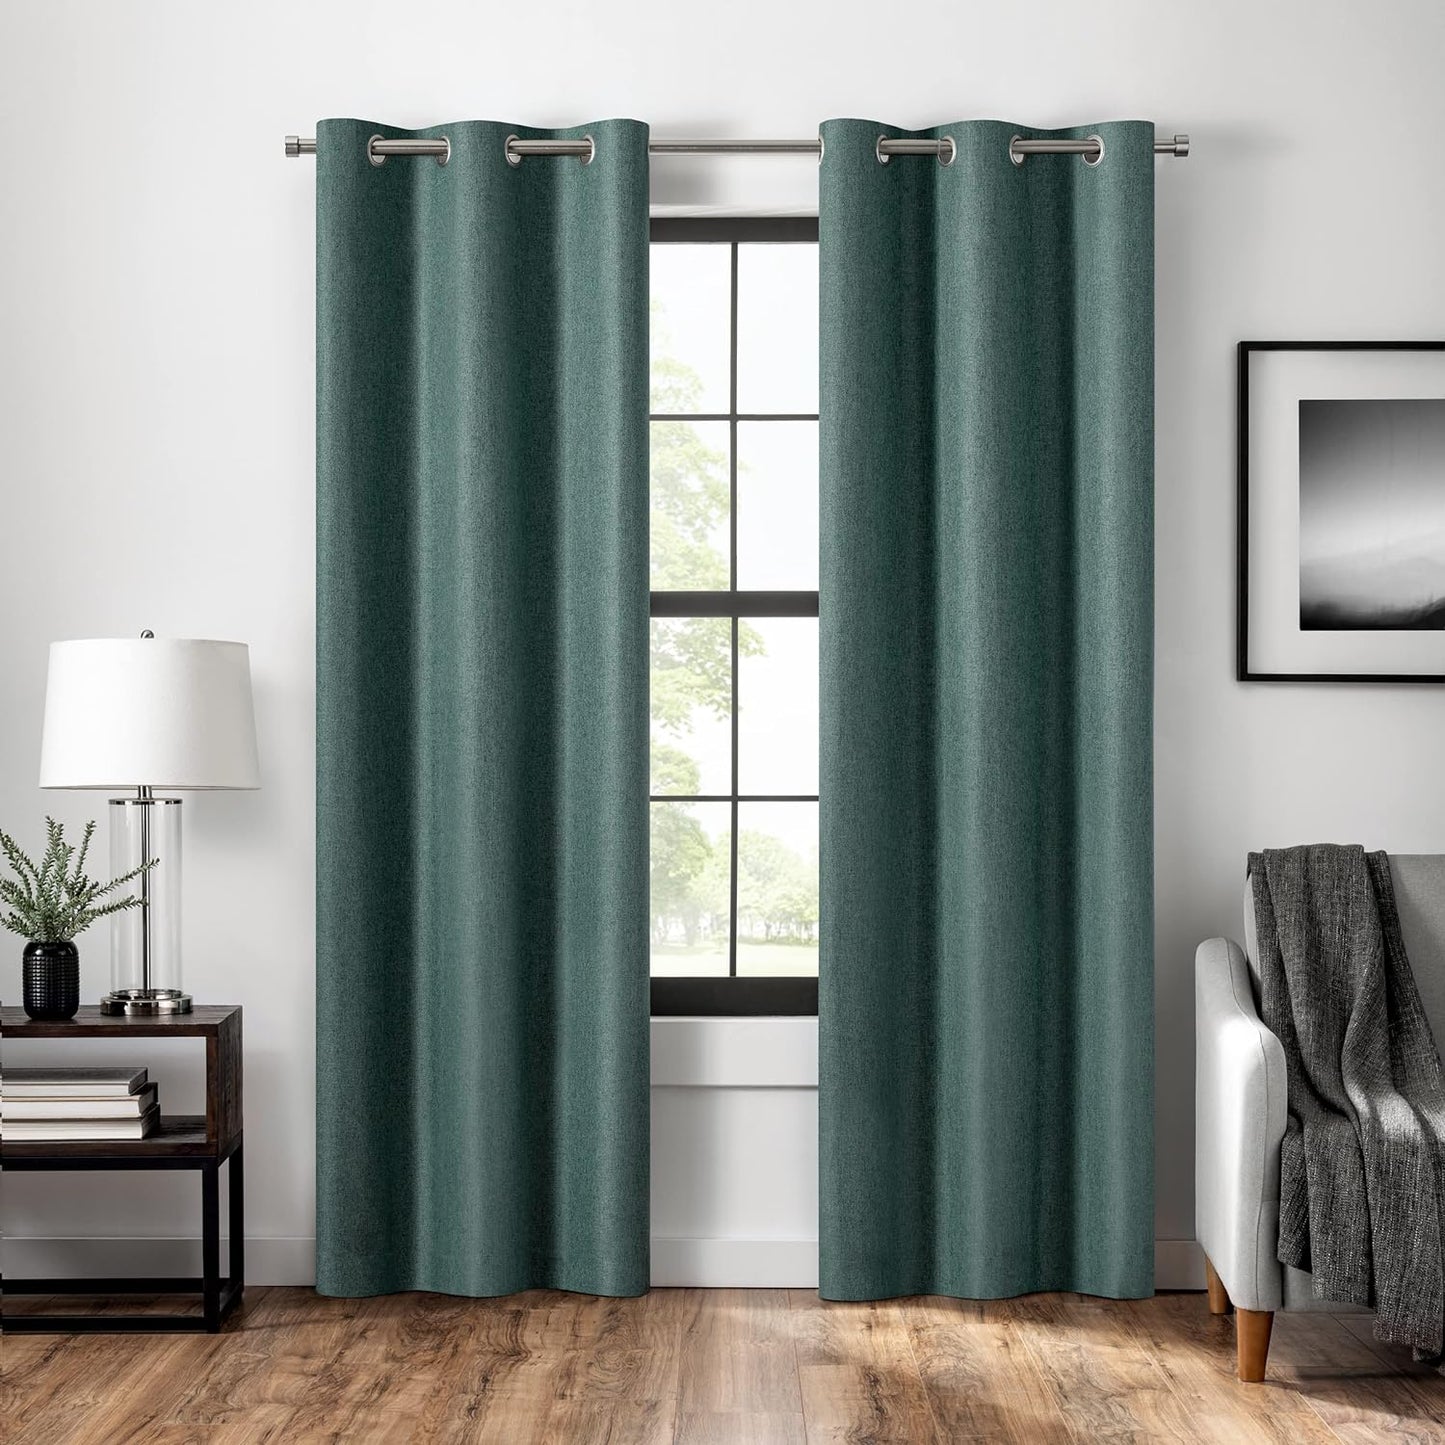 Eclipse Cannes Magnitech 100% Blackout Curtain, Rod Pocket Window Curtain Panel, Seamless Magnetic Closure for Bedroom, Living Room or Nursery, 63 in Long X 40 in Wide, (1 Panel), Natural/ Linen  KEECO Teal Grommet 40X84